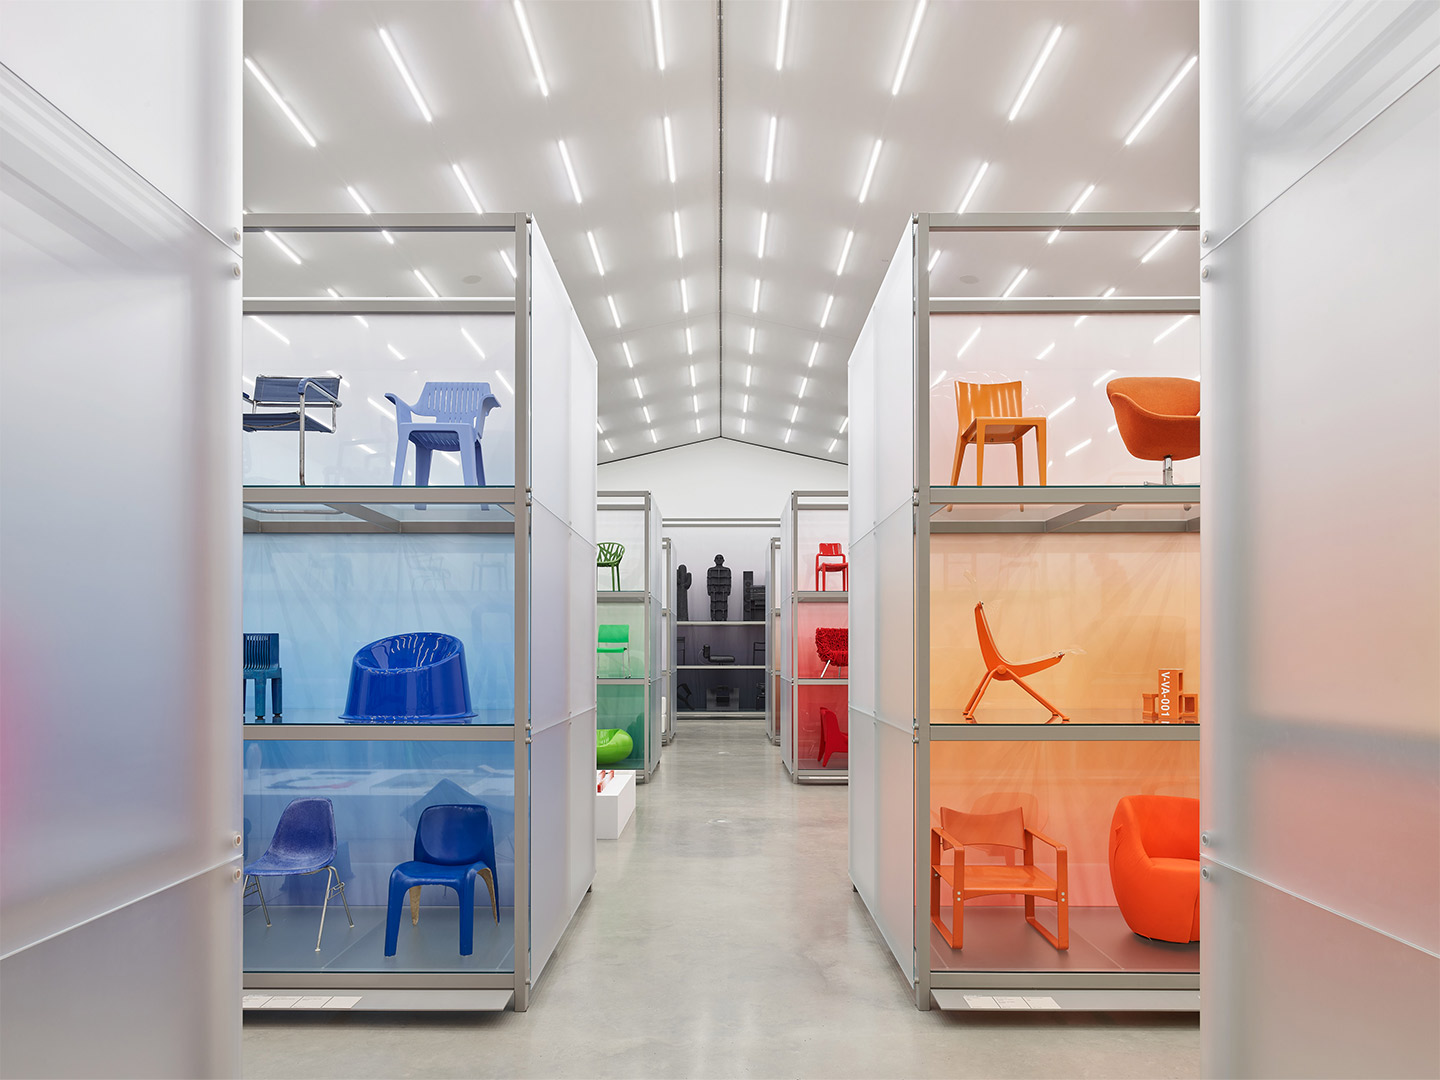 Colour Rush exhibition at the Vitra furniture facility in Germany